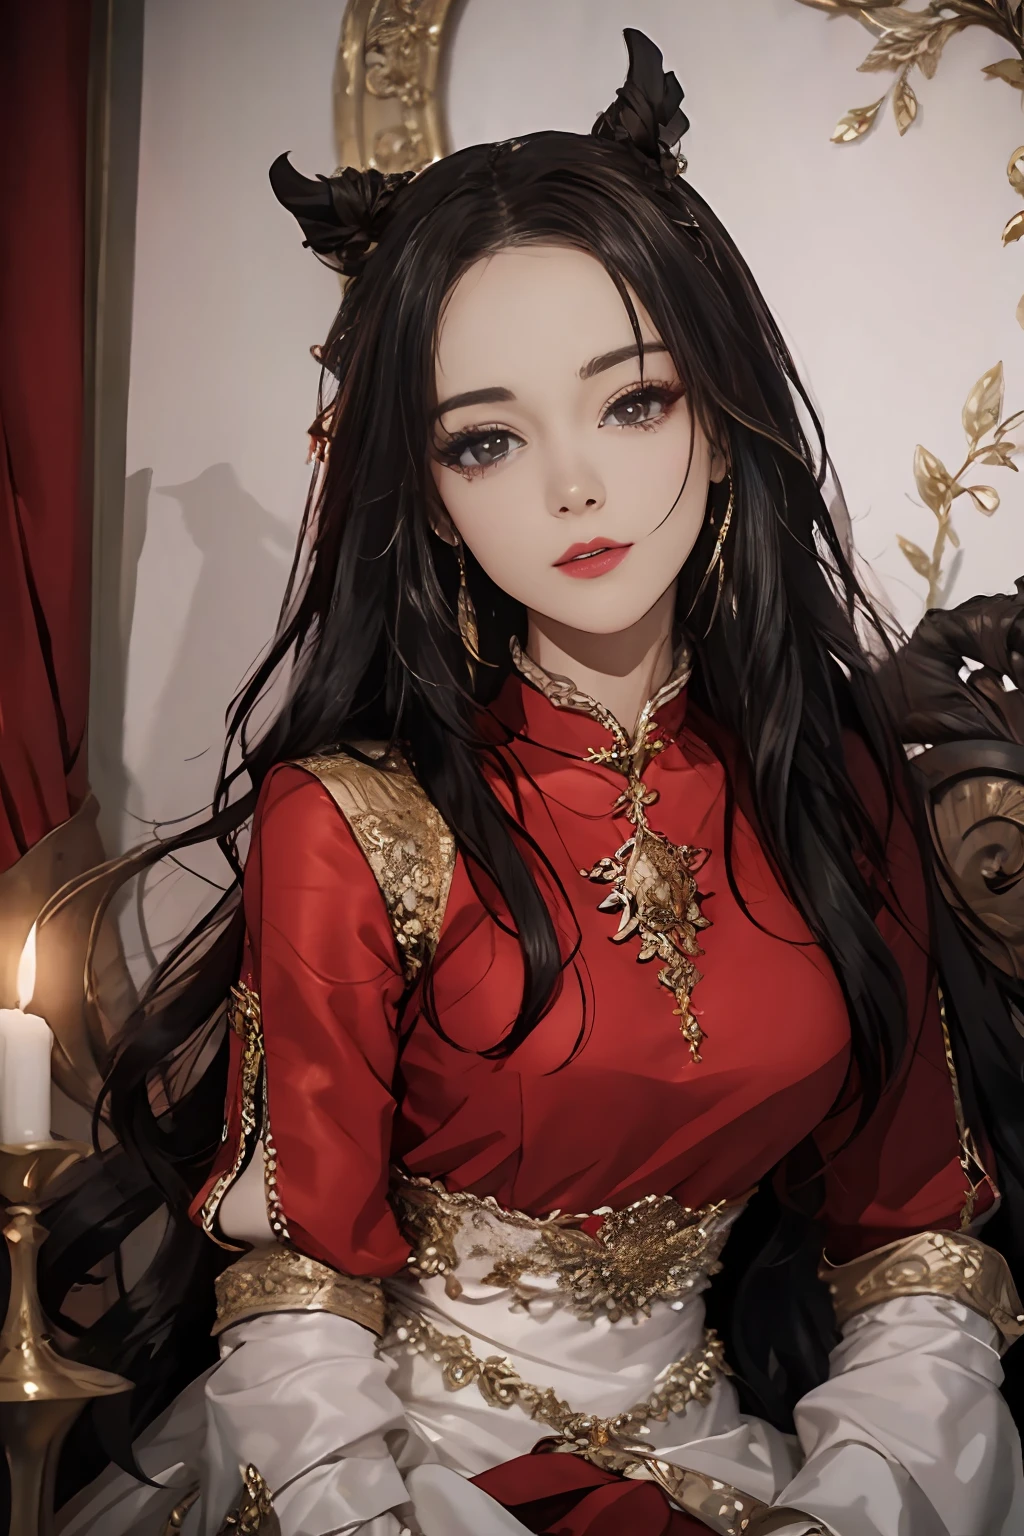 ((Best Quality)), ((Ultra High Resolution)), ((Realistic)), Fine details, Age 19 on Appearance, Black hair, Perfect face shape, Moderate Makeup:1.5, Face lighting, Accentuating Details, Long hair, Wearing Chinese Wedding Dress, Gold Headgear Decoration, Holding a fan, Red Wedding Dress Extra Points: 1.3, Gold Dress Details. portrait of a full body, windows, a bed, drapes, Candlelight, present a picture of a long-range pose.